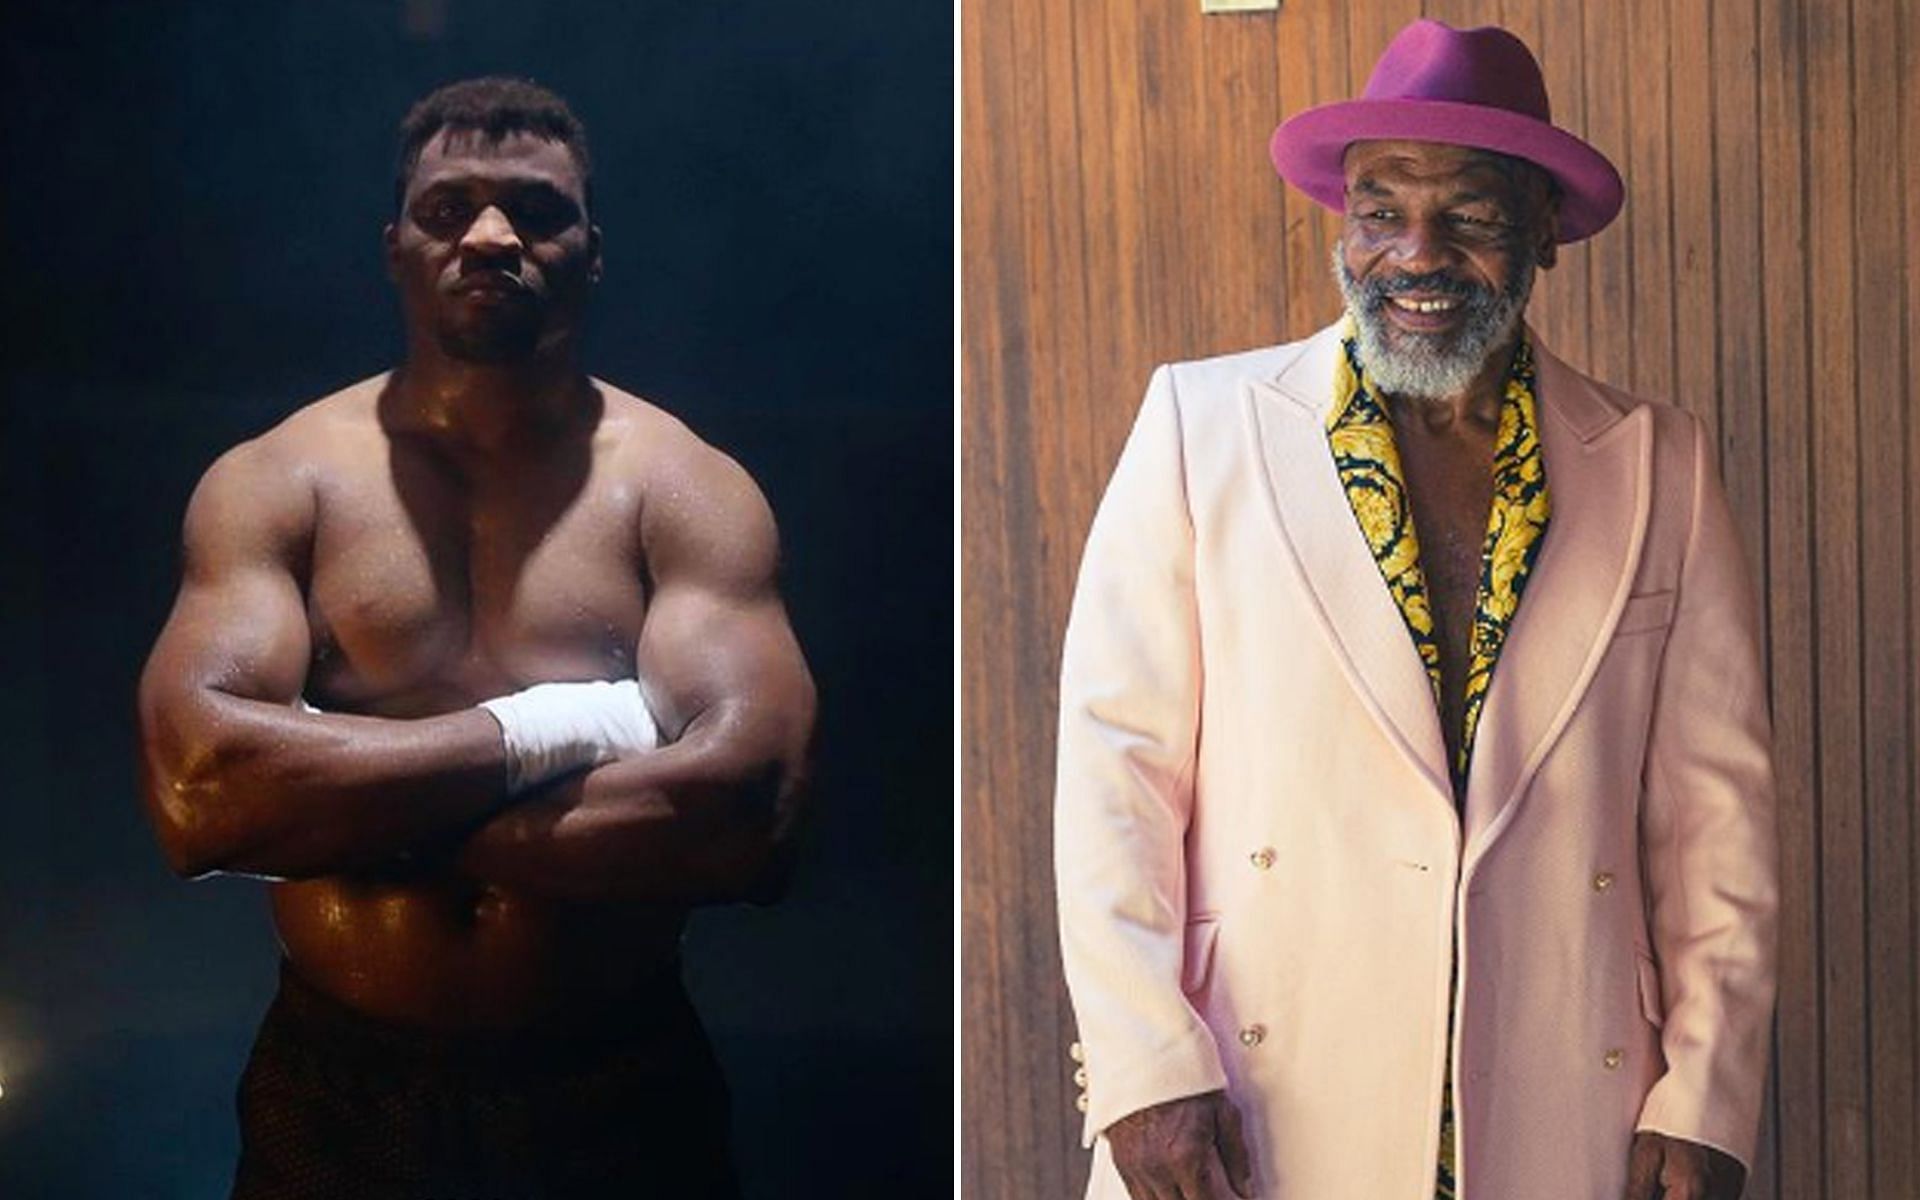 Francis Ngannou [L] and Mike Tyson [R] [Images via @francisngannou and @miketyson Instagram]